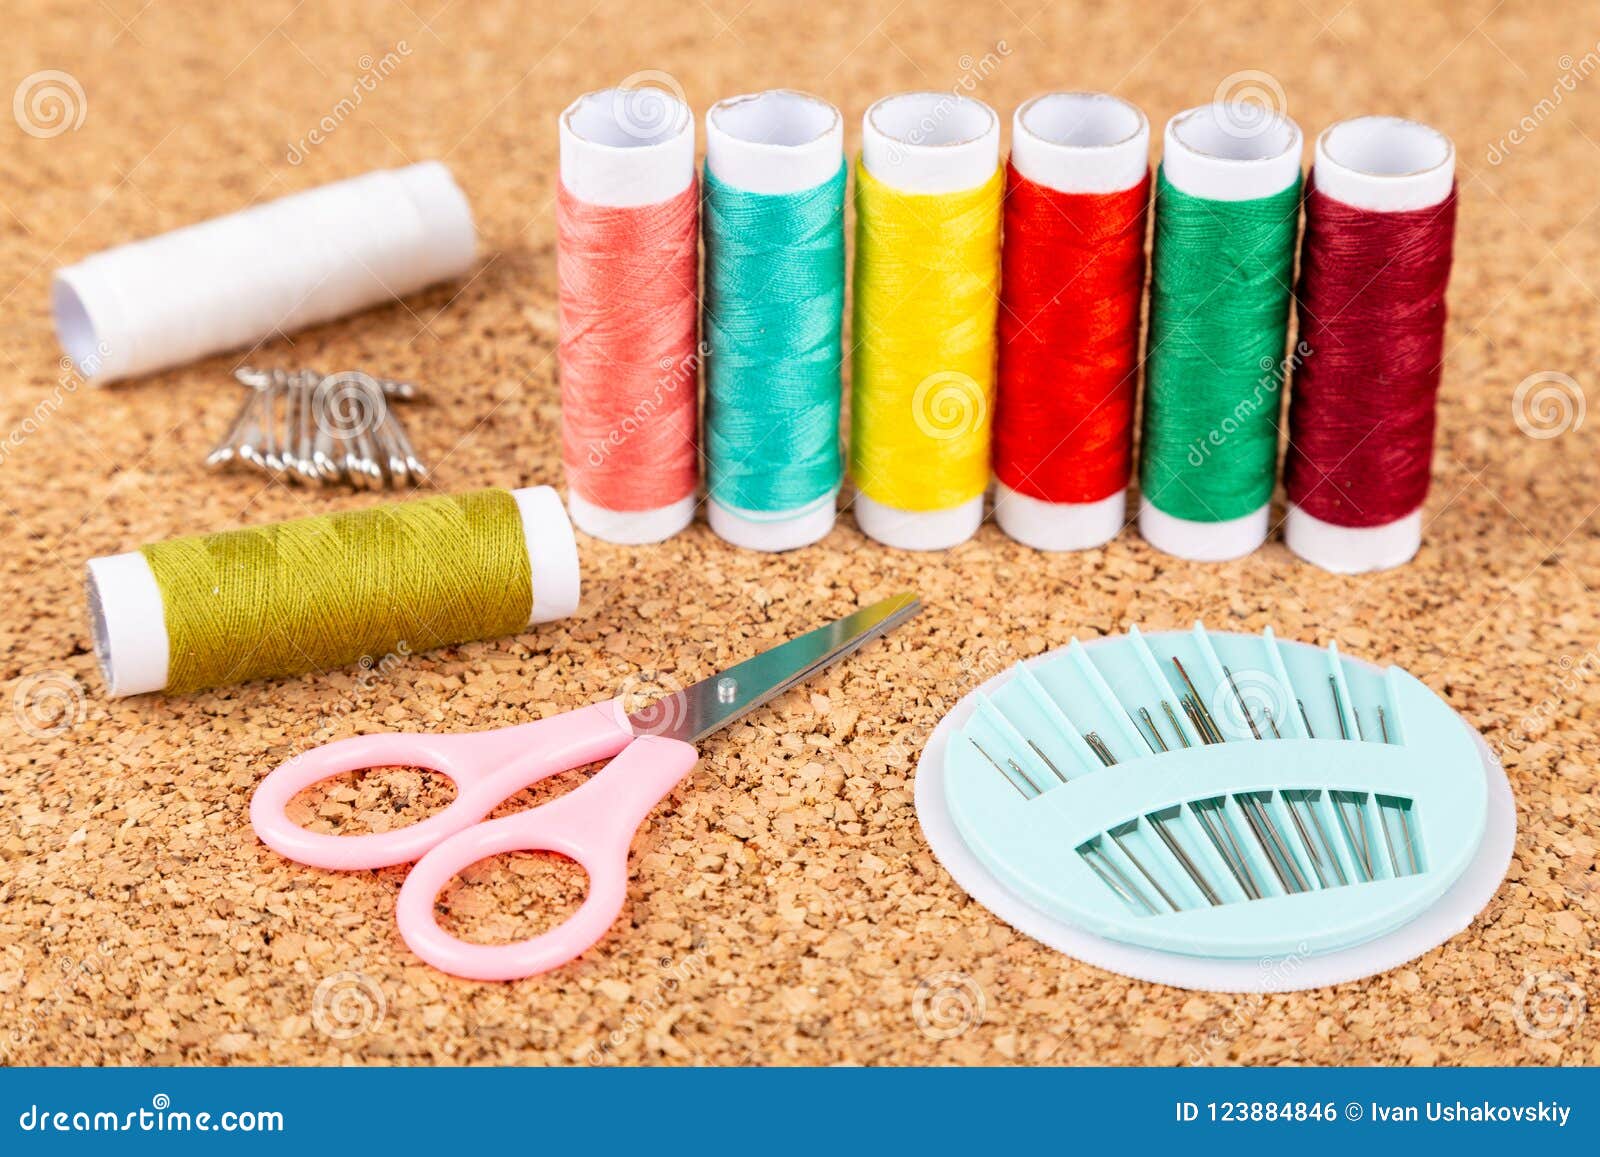 Sewing Kit with Colorful Spools of Threads and Instruments Stock Photo ...